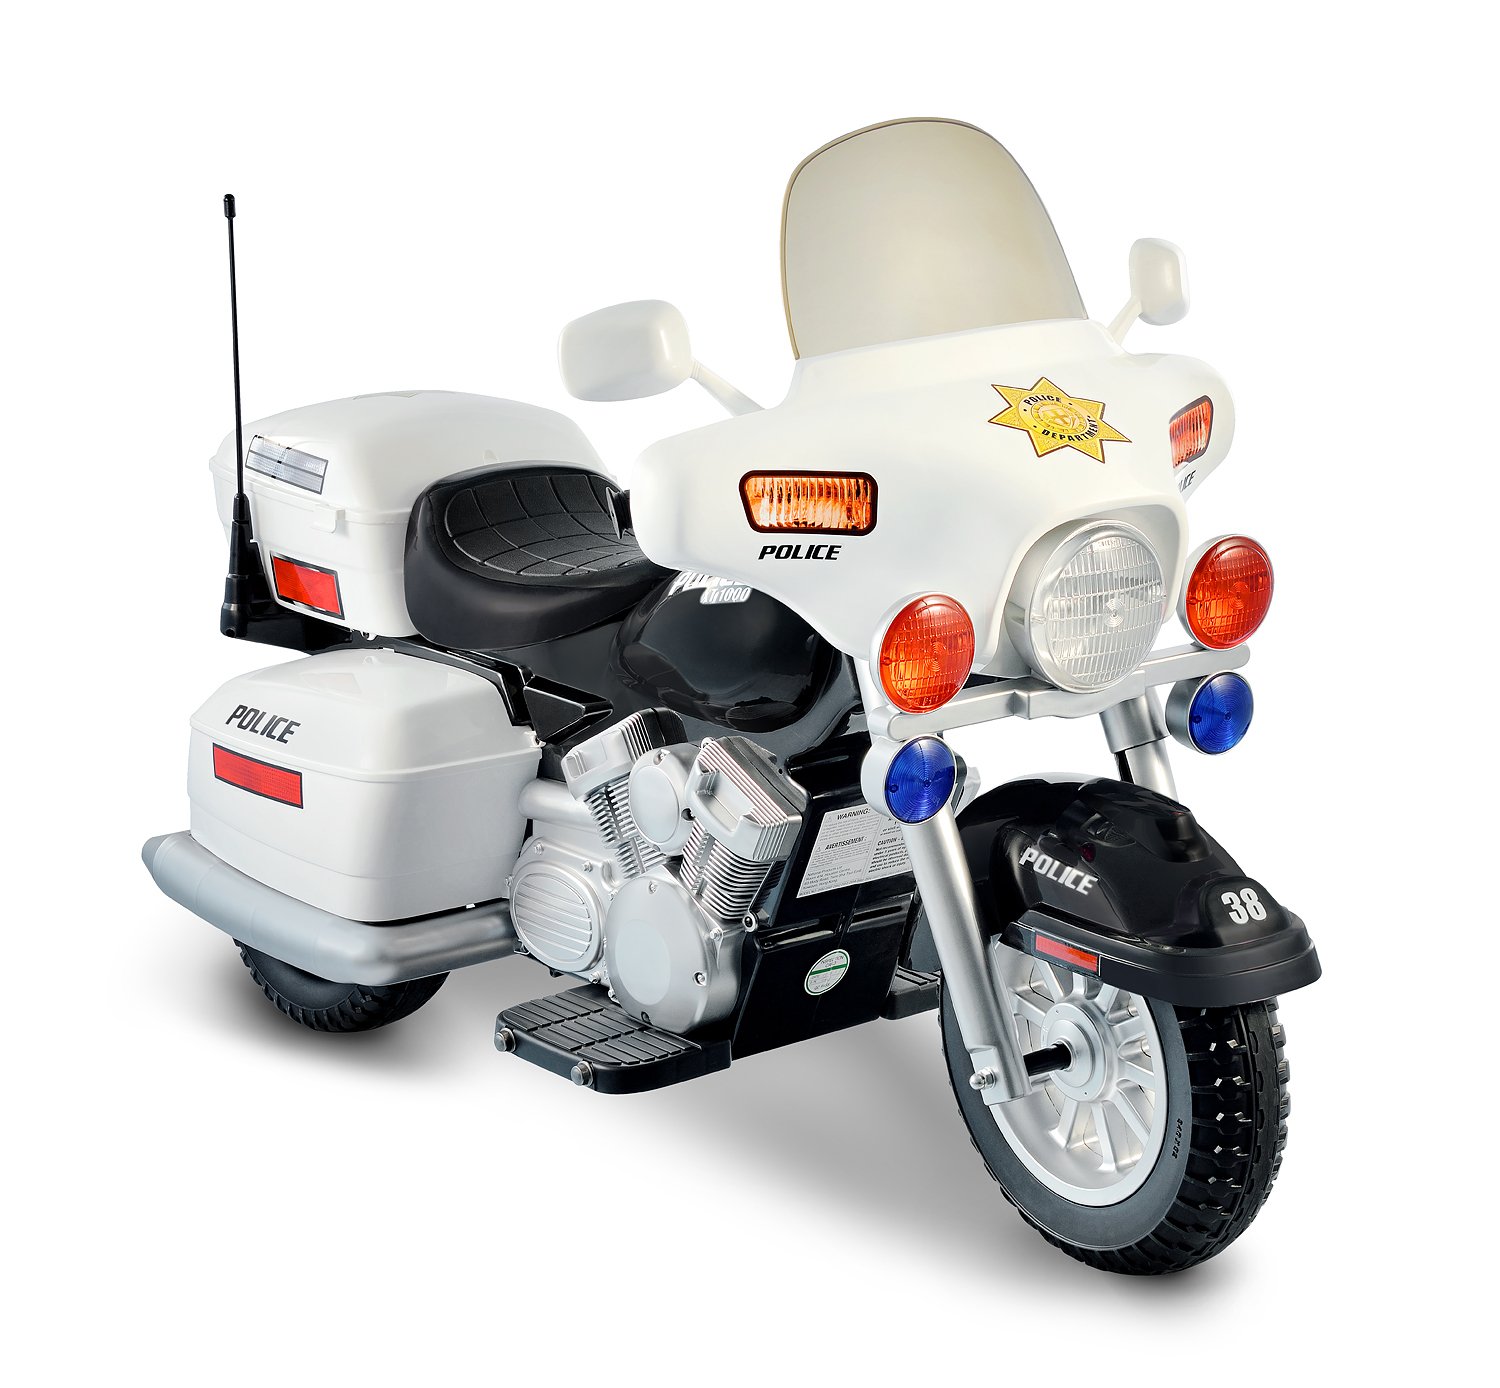 12V Police Motorcycle-best electric scooter for kids